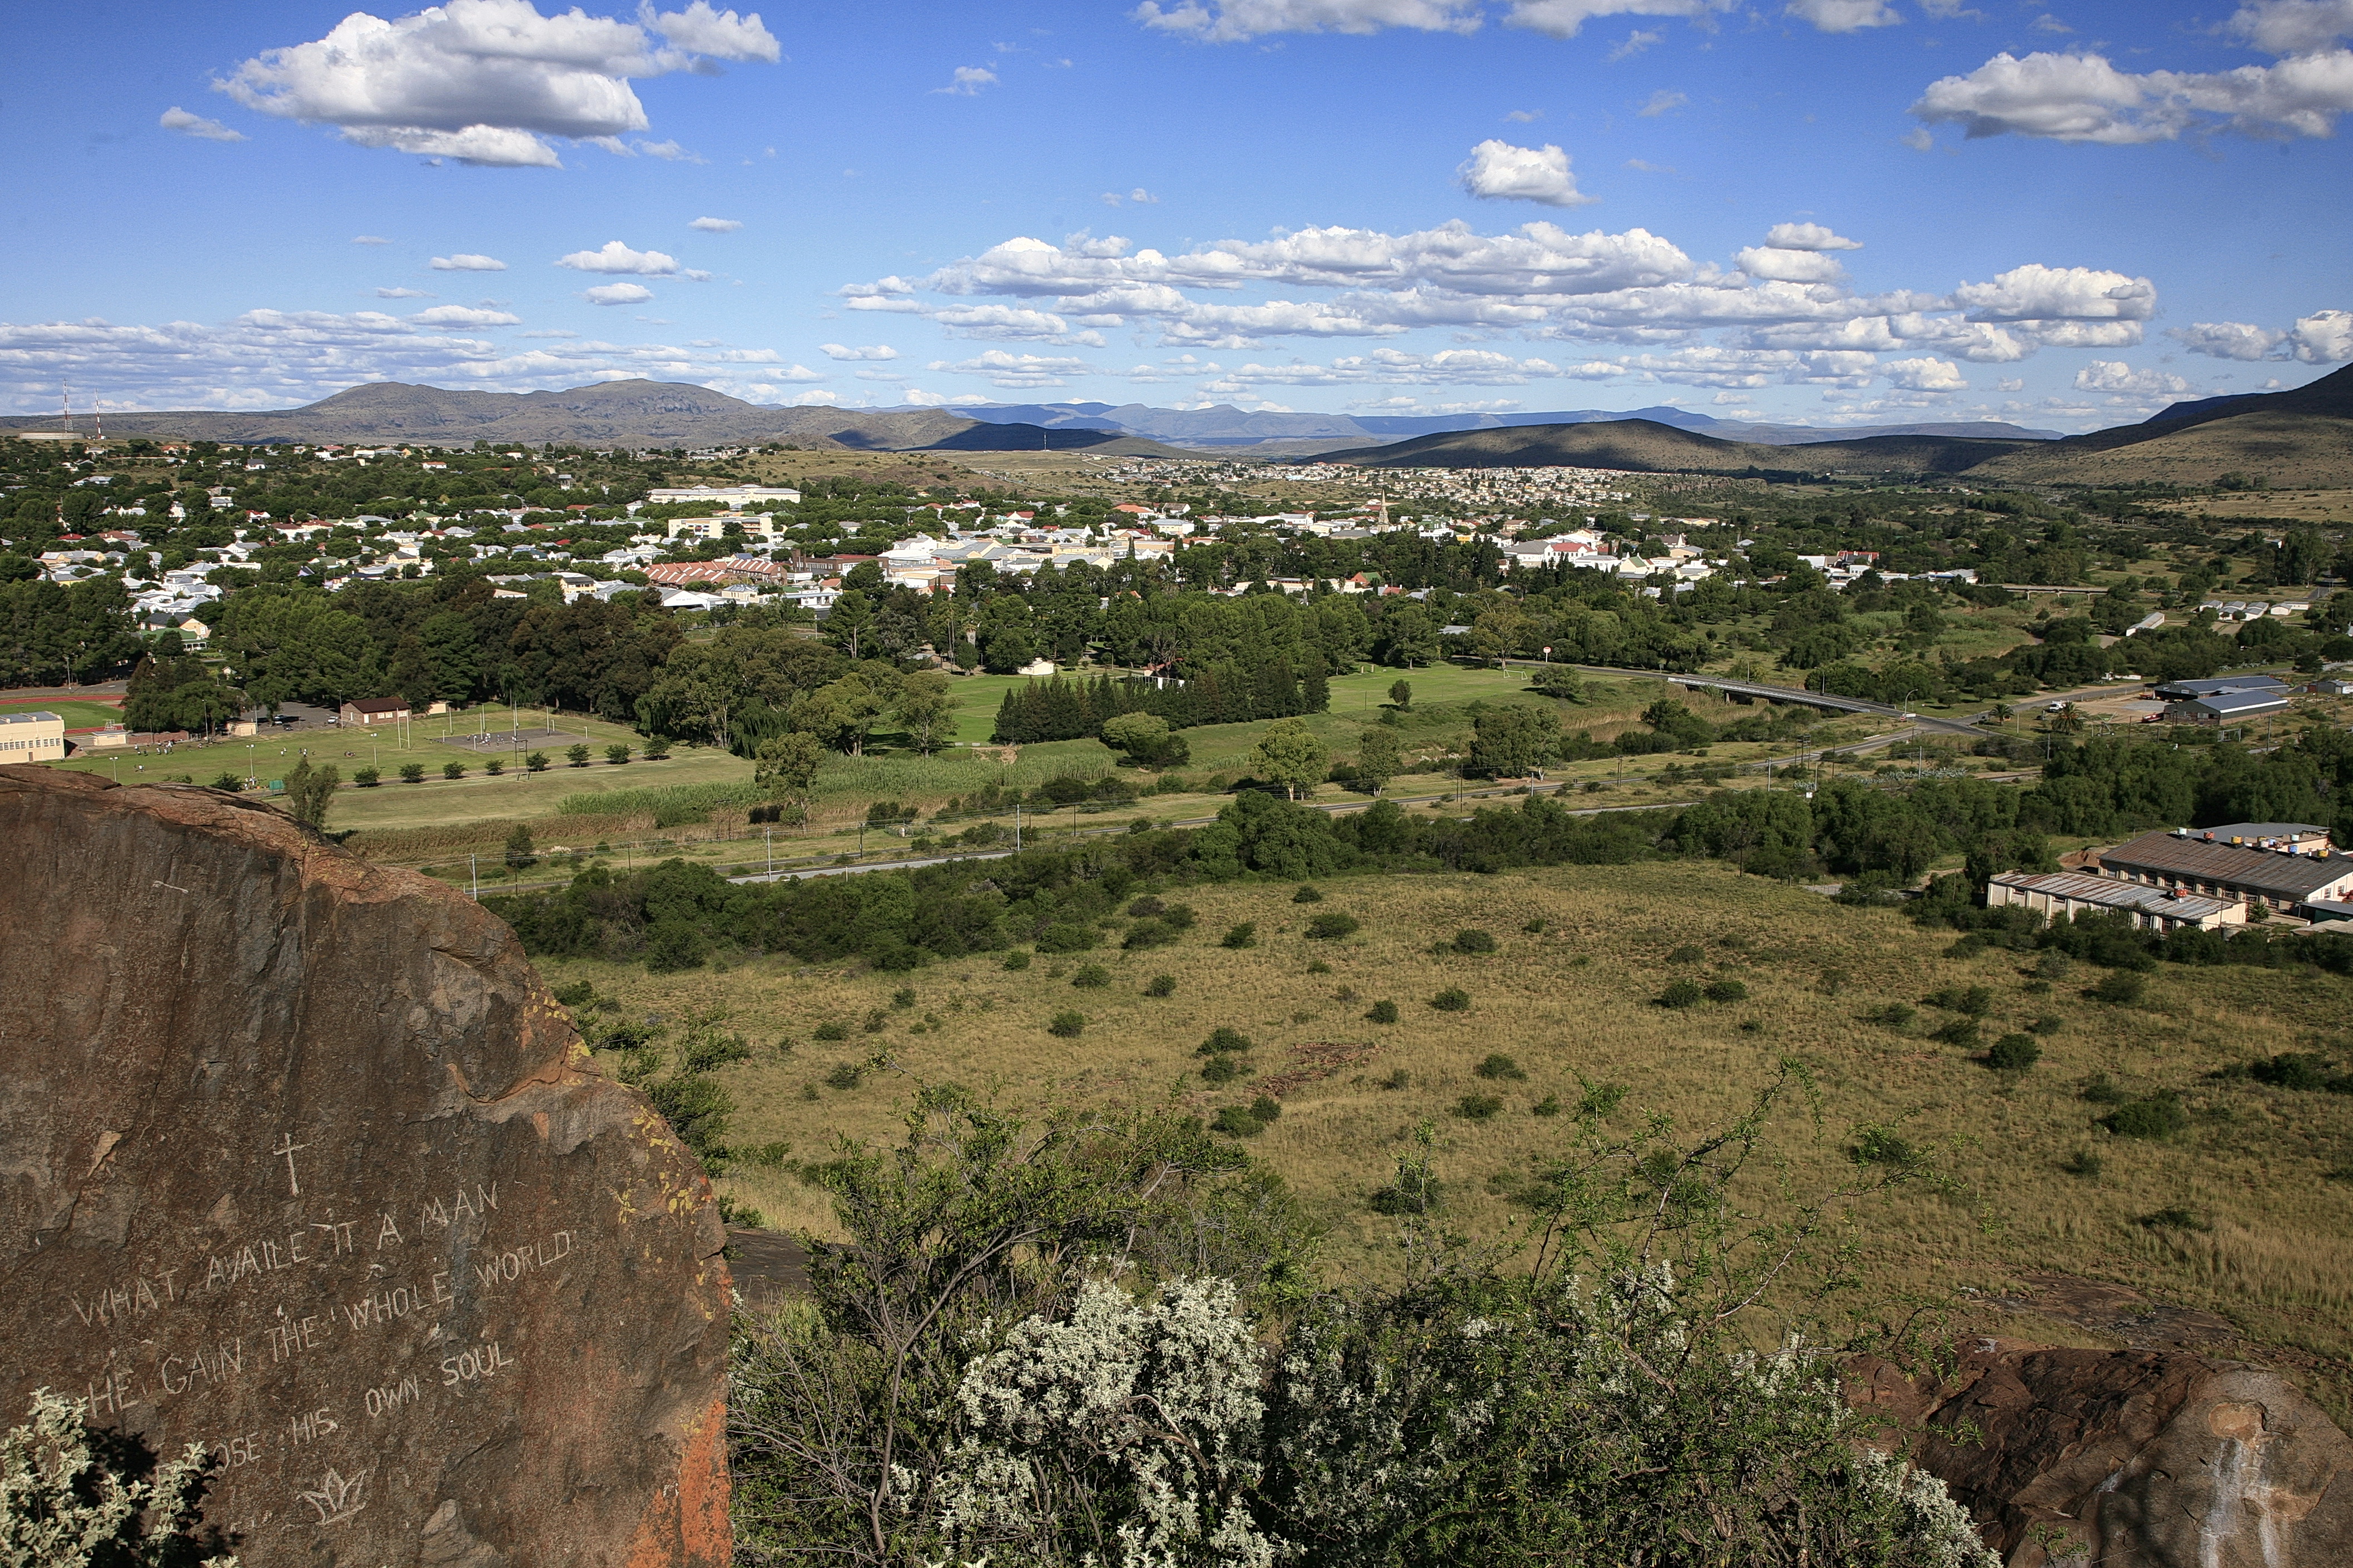 “What availe (sic) it a man that he gain the whole world but lose his own soul.” – a biblical quote on Oukop overlooking Cradock, said to be the handiwork of a British soldier. Image: Chris Marais